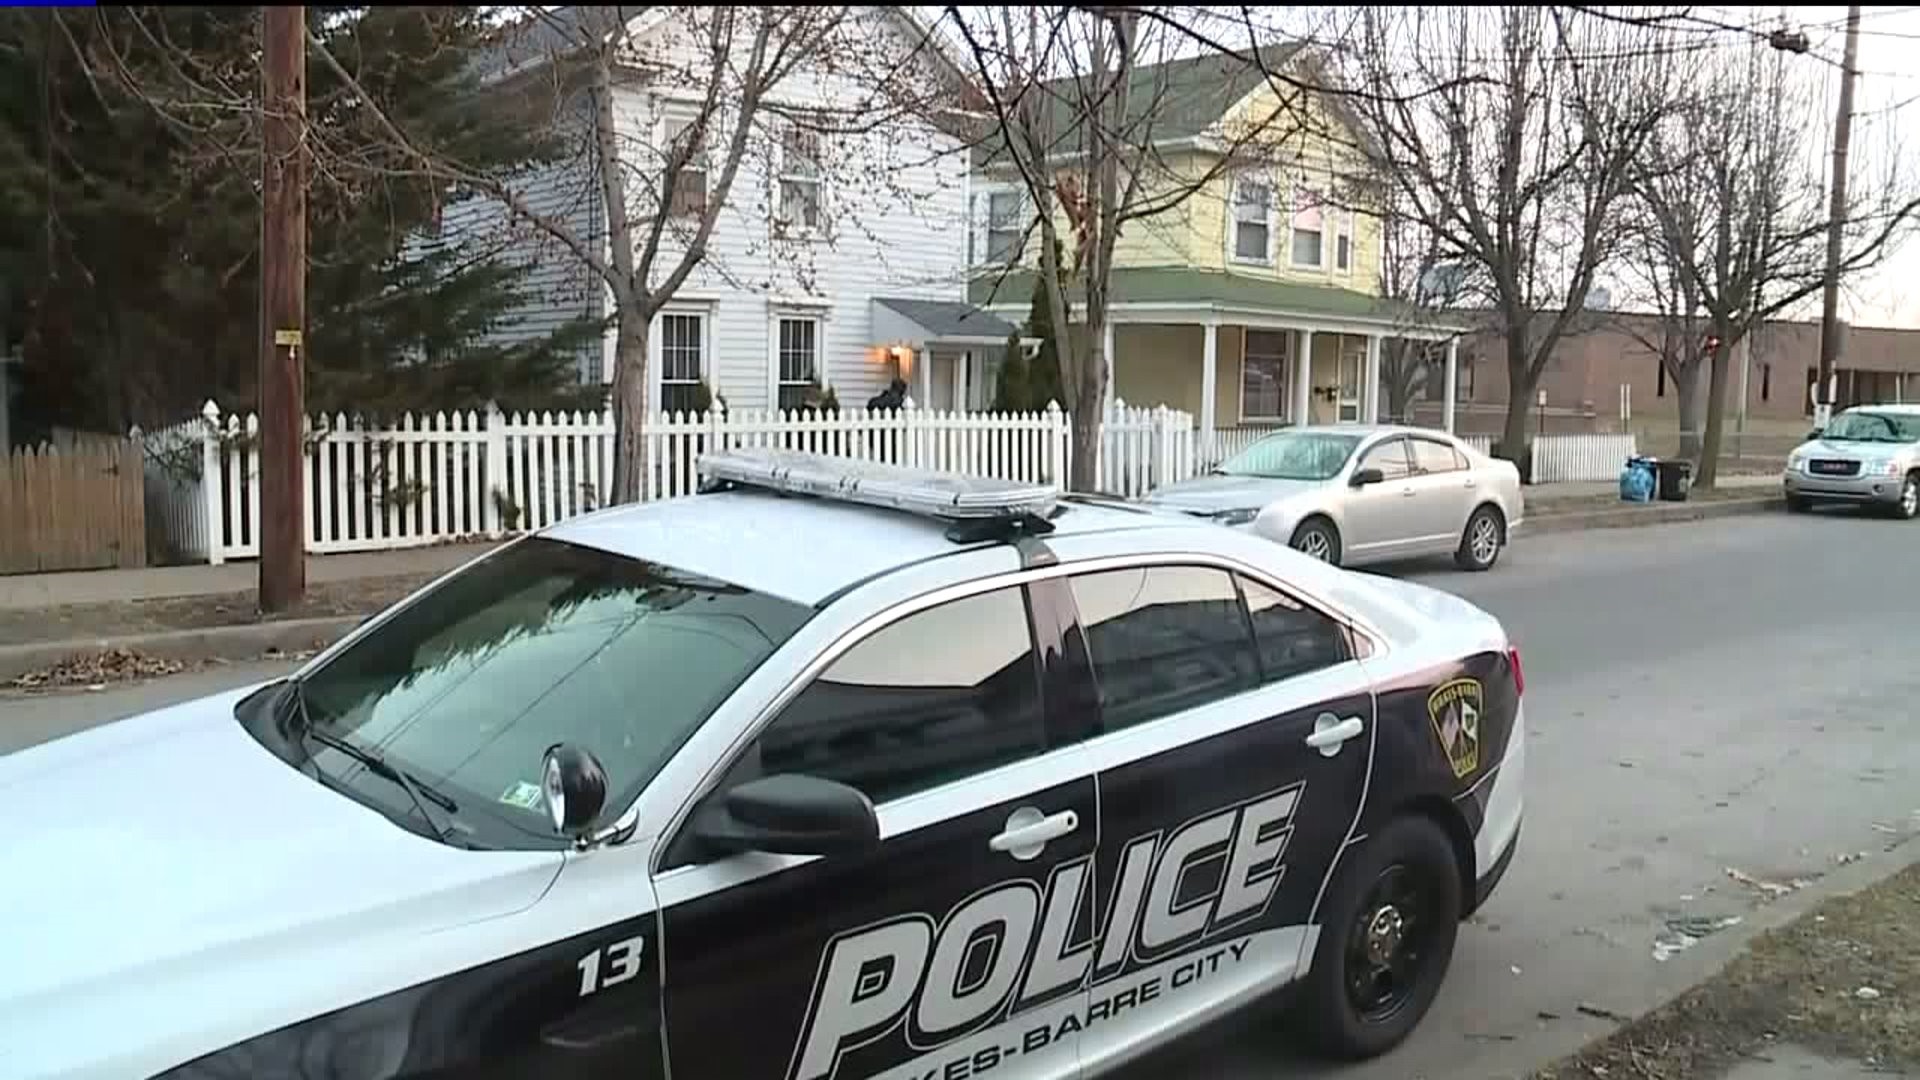 Man Rushed to Hospital After Stabbing in Wilkes-Barre